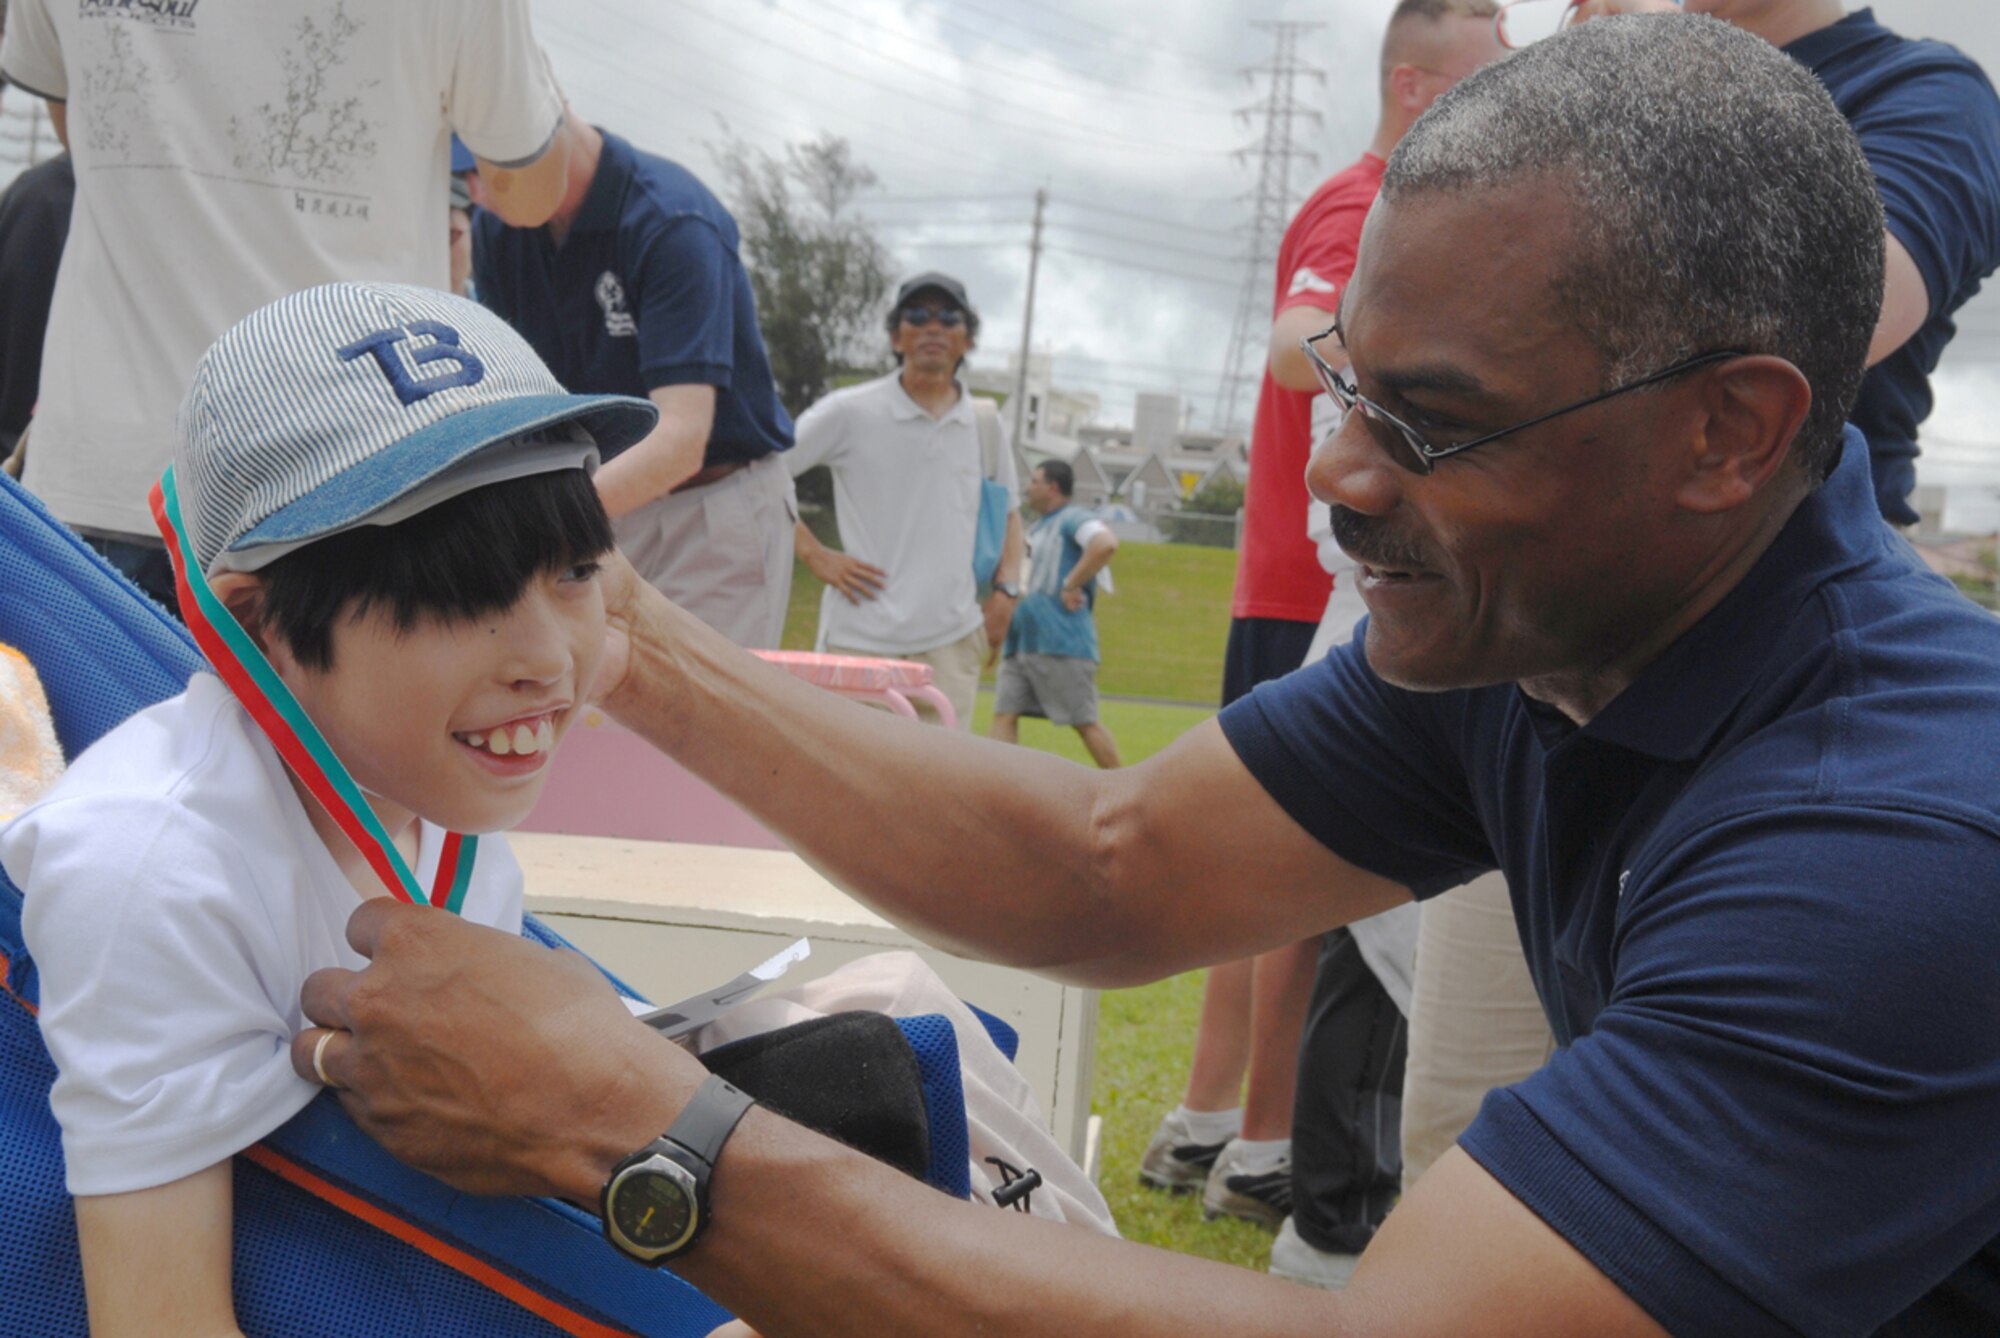 Yujiro Nakamura, Awase Special Needs School, receives his silver medal from Chief Master Sgt. Jack Johnson Jr., 18th Wing command chief, after competing in the softball throw event June 24.  More than 900 participants enjoyed this year’s Special Olympics at Kadena Air Base, Japan.
 (U.S. Air Force/Senior Airman Jeremy McGuffin)